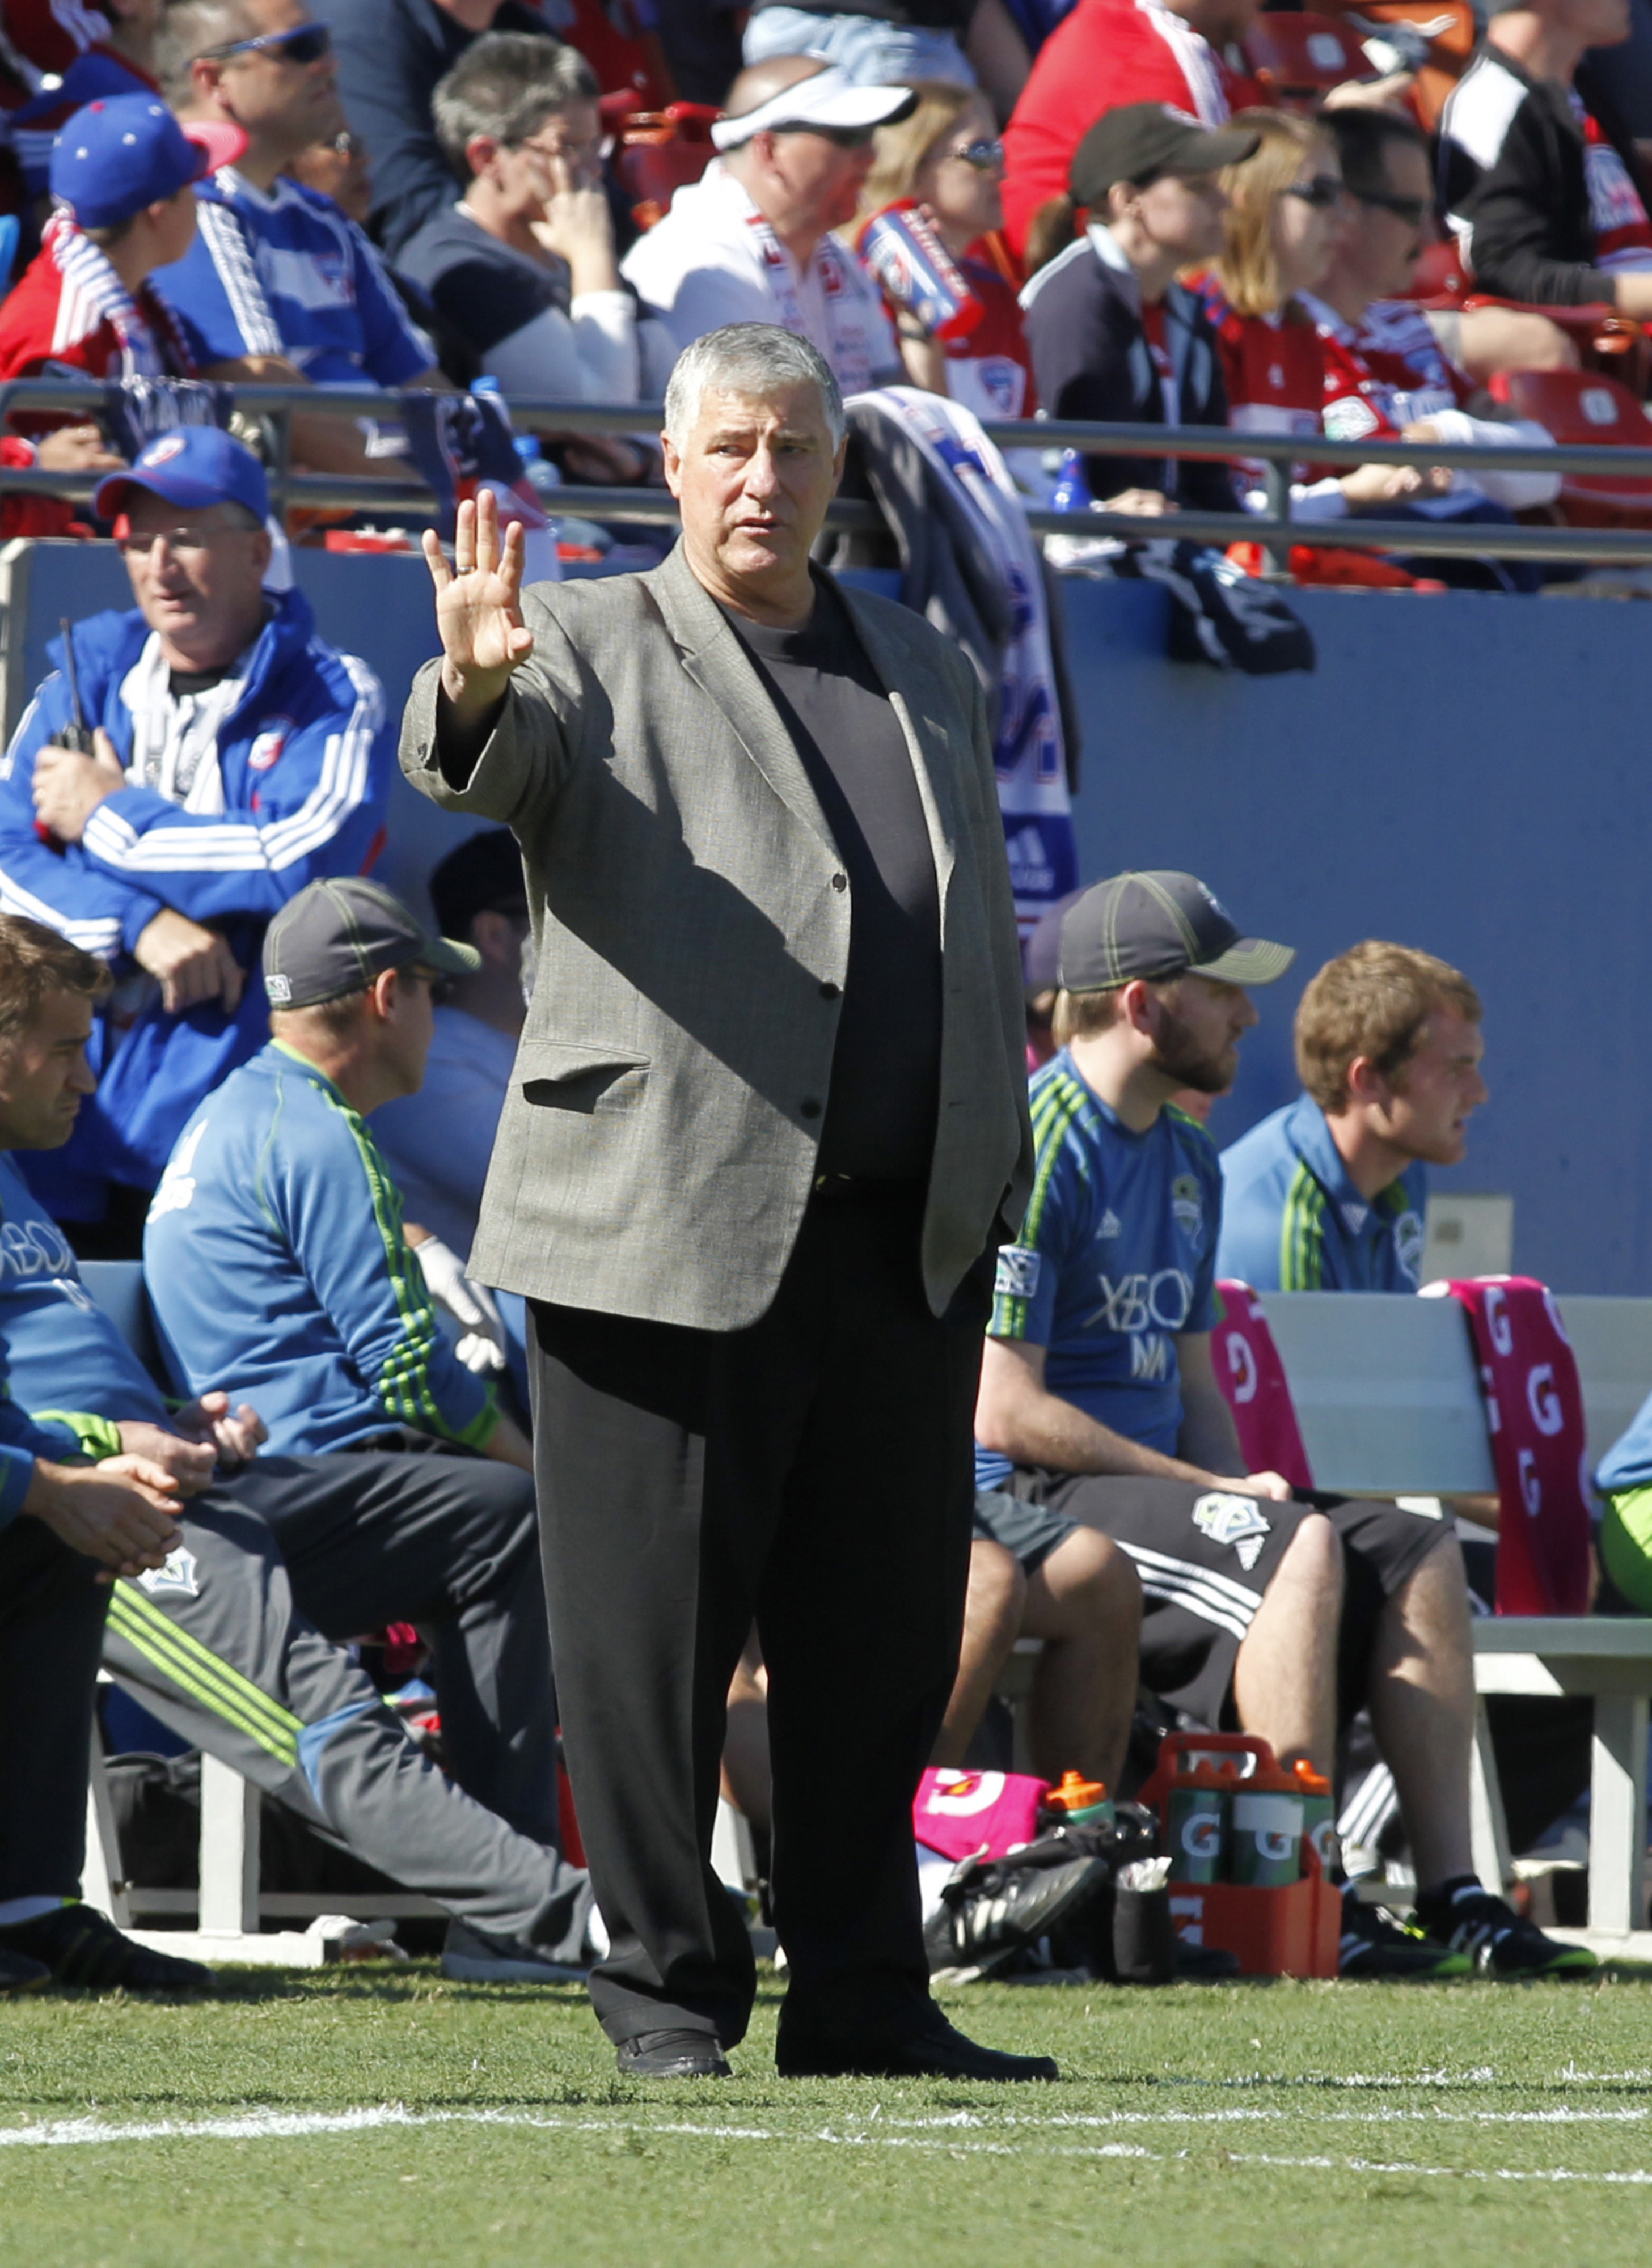 Hey, here is a look at Sigi in front of the FC Dallas crowd. Just for fun. 